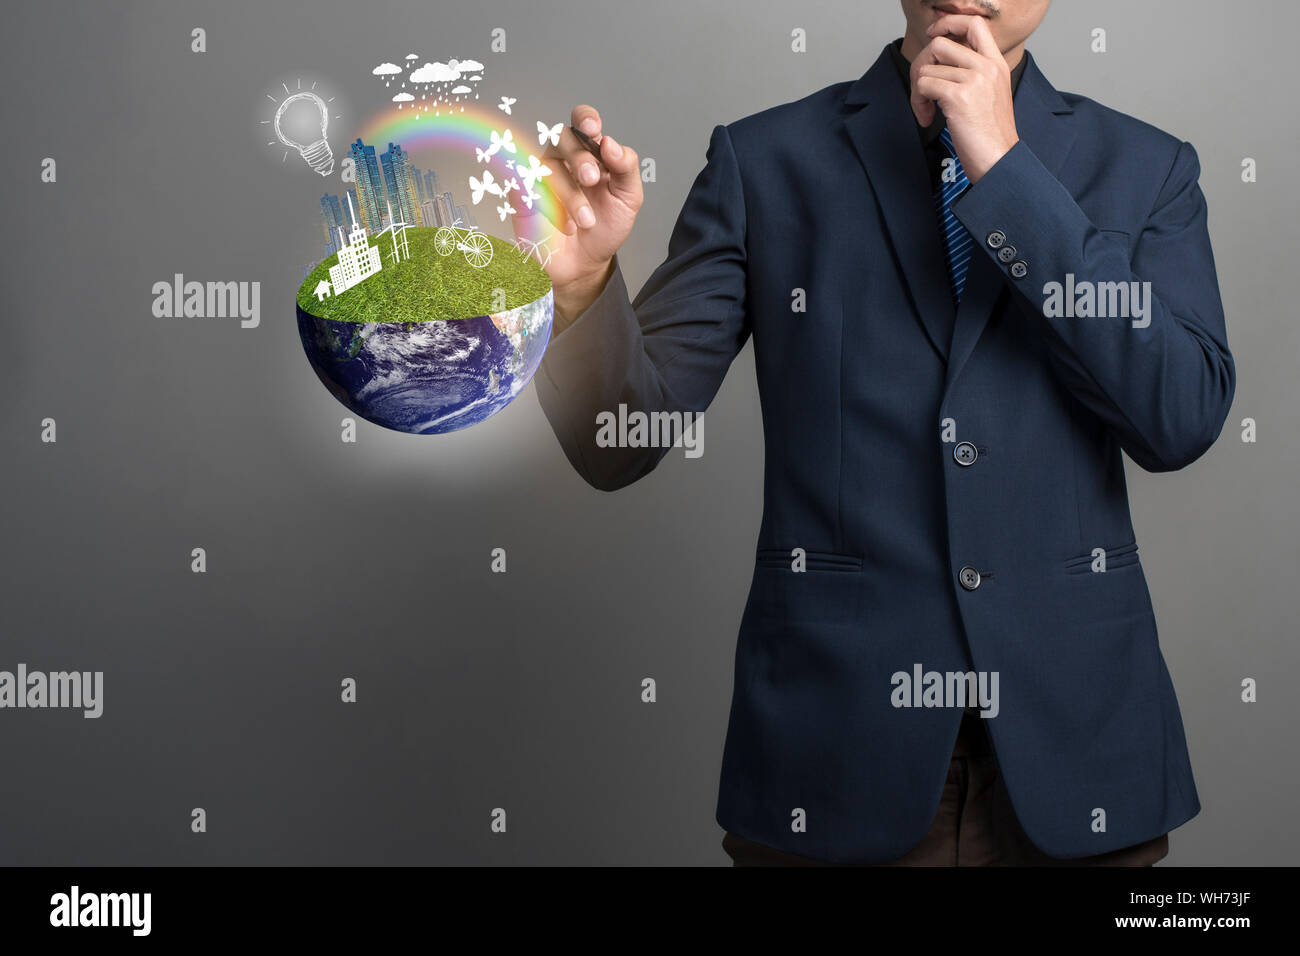 Midsection Of Businessman Pointing At Illustrative Globe While Standing Against Gray Background Stock Photo